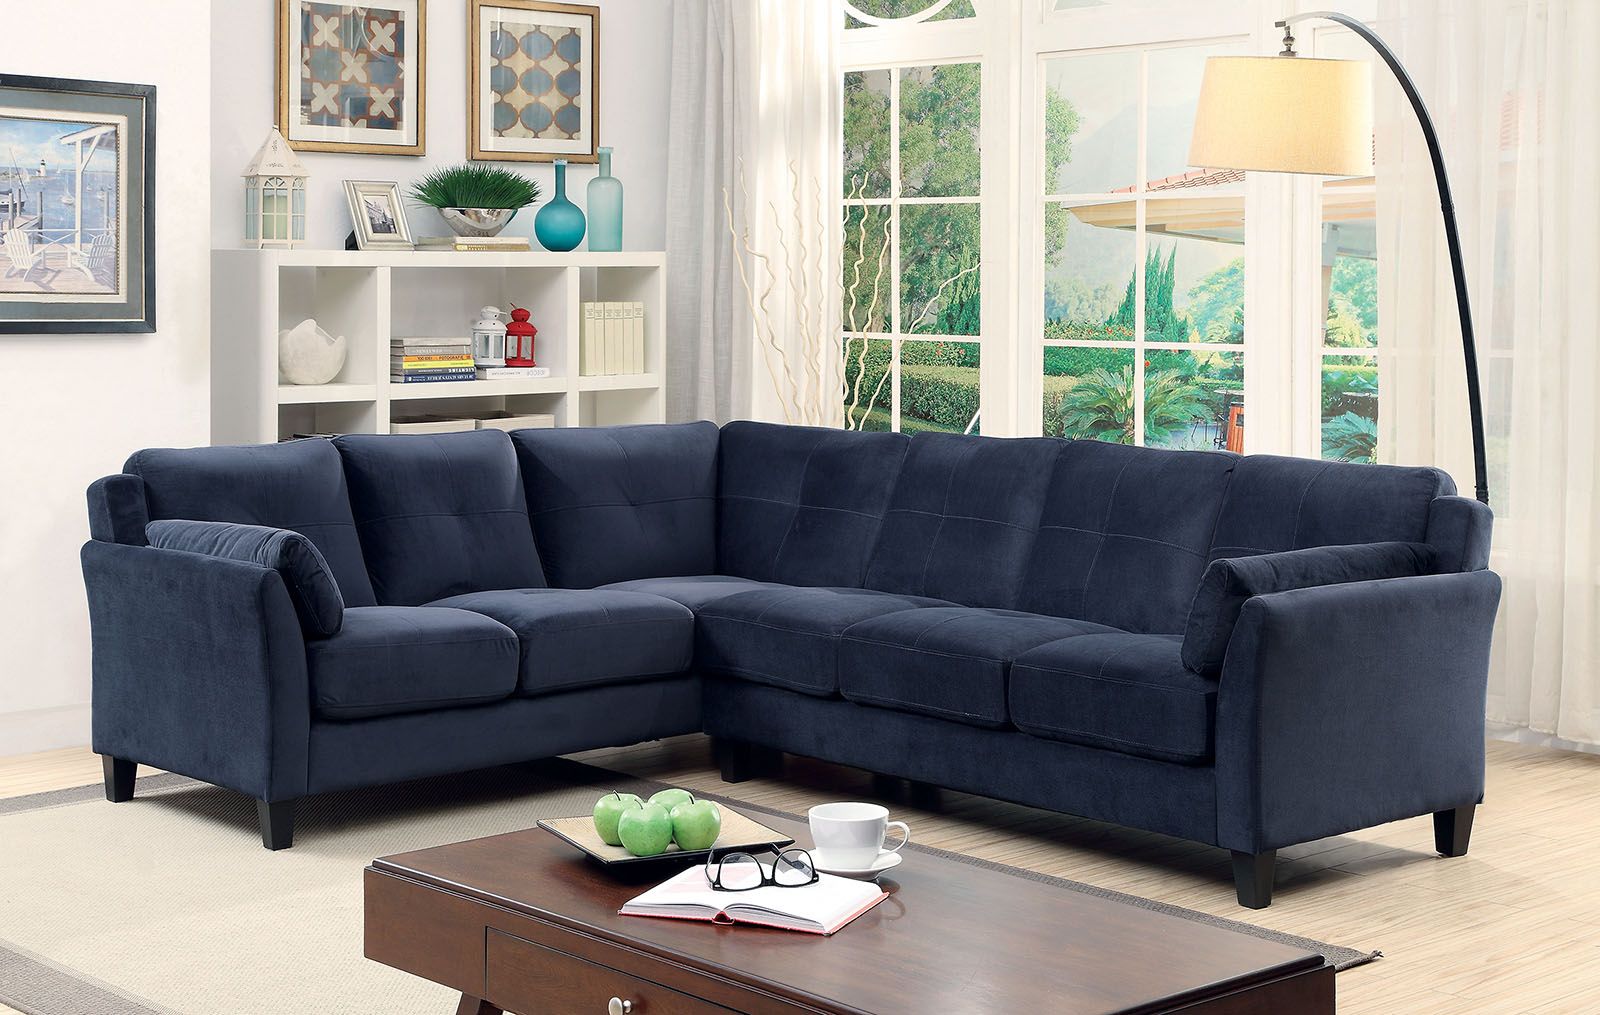 6368nv Nvay Blue Contemporary Sectional Sofa Furniture Of Within Paul Modular Sectional Sofas Blue (View 3 of 15)